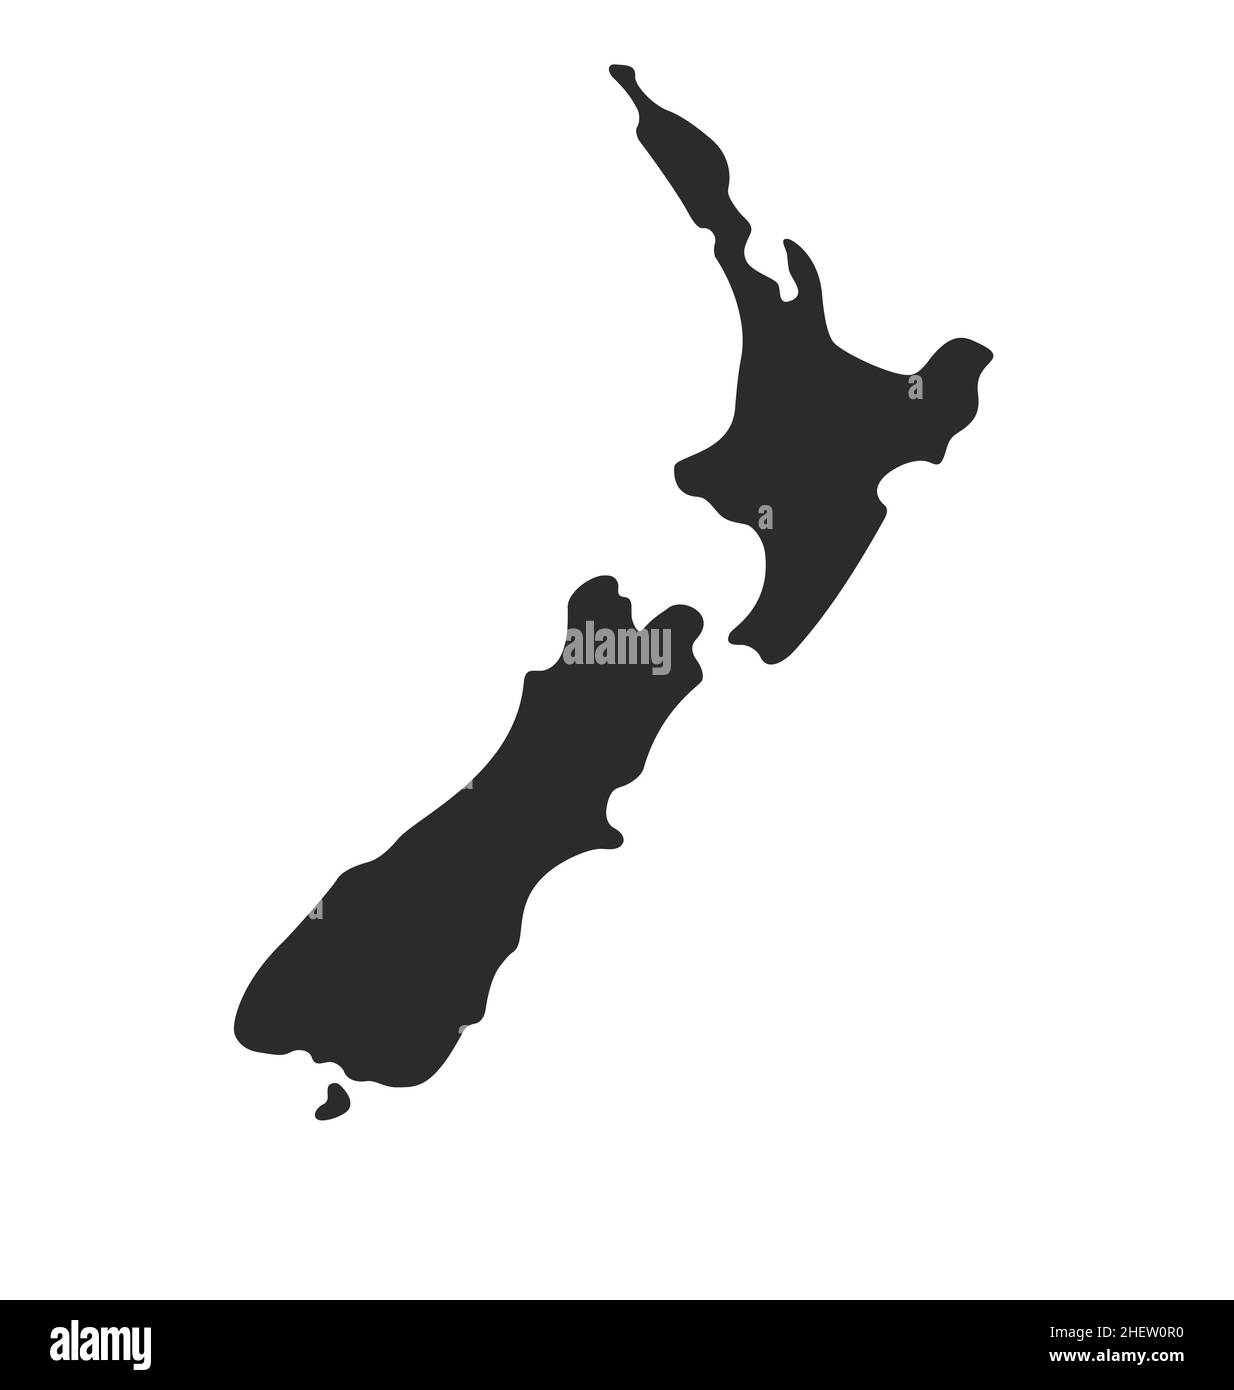 new zealand map shape simplified silhouette vector isolated on white background Stock Vector